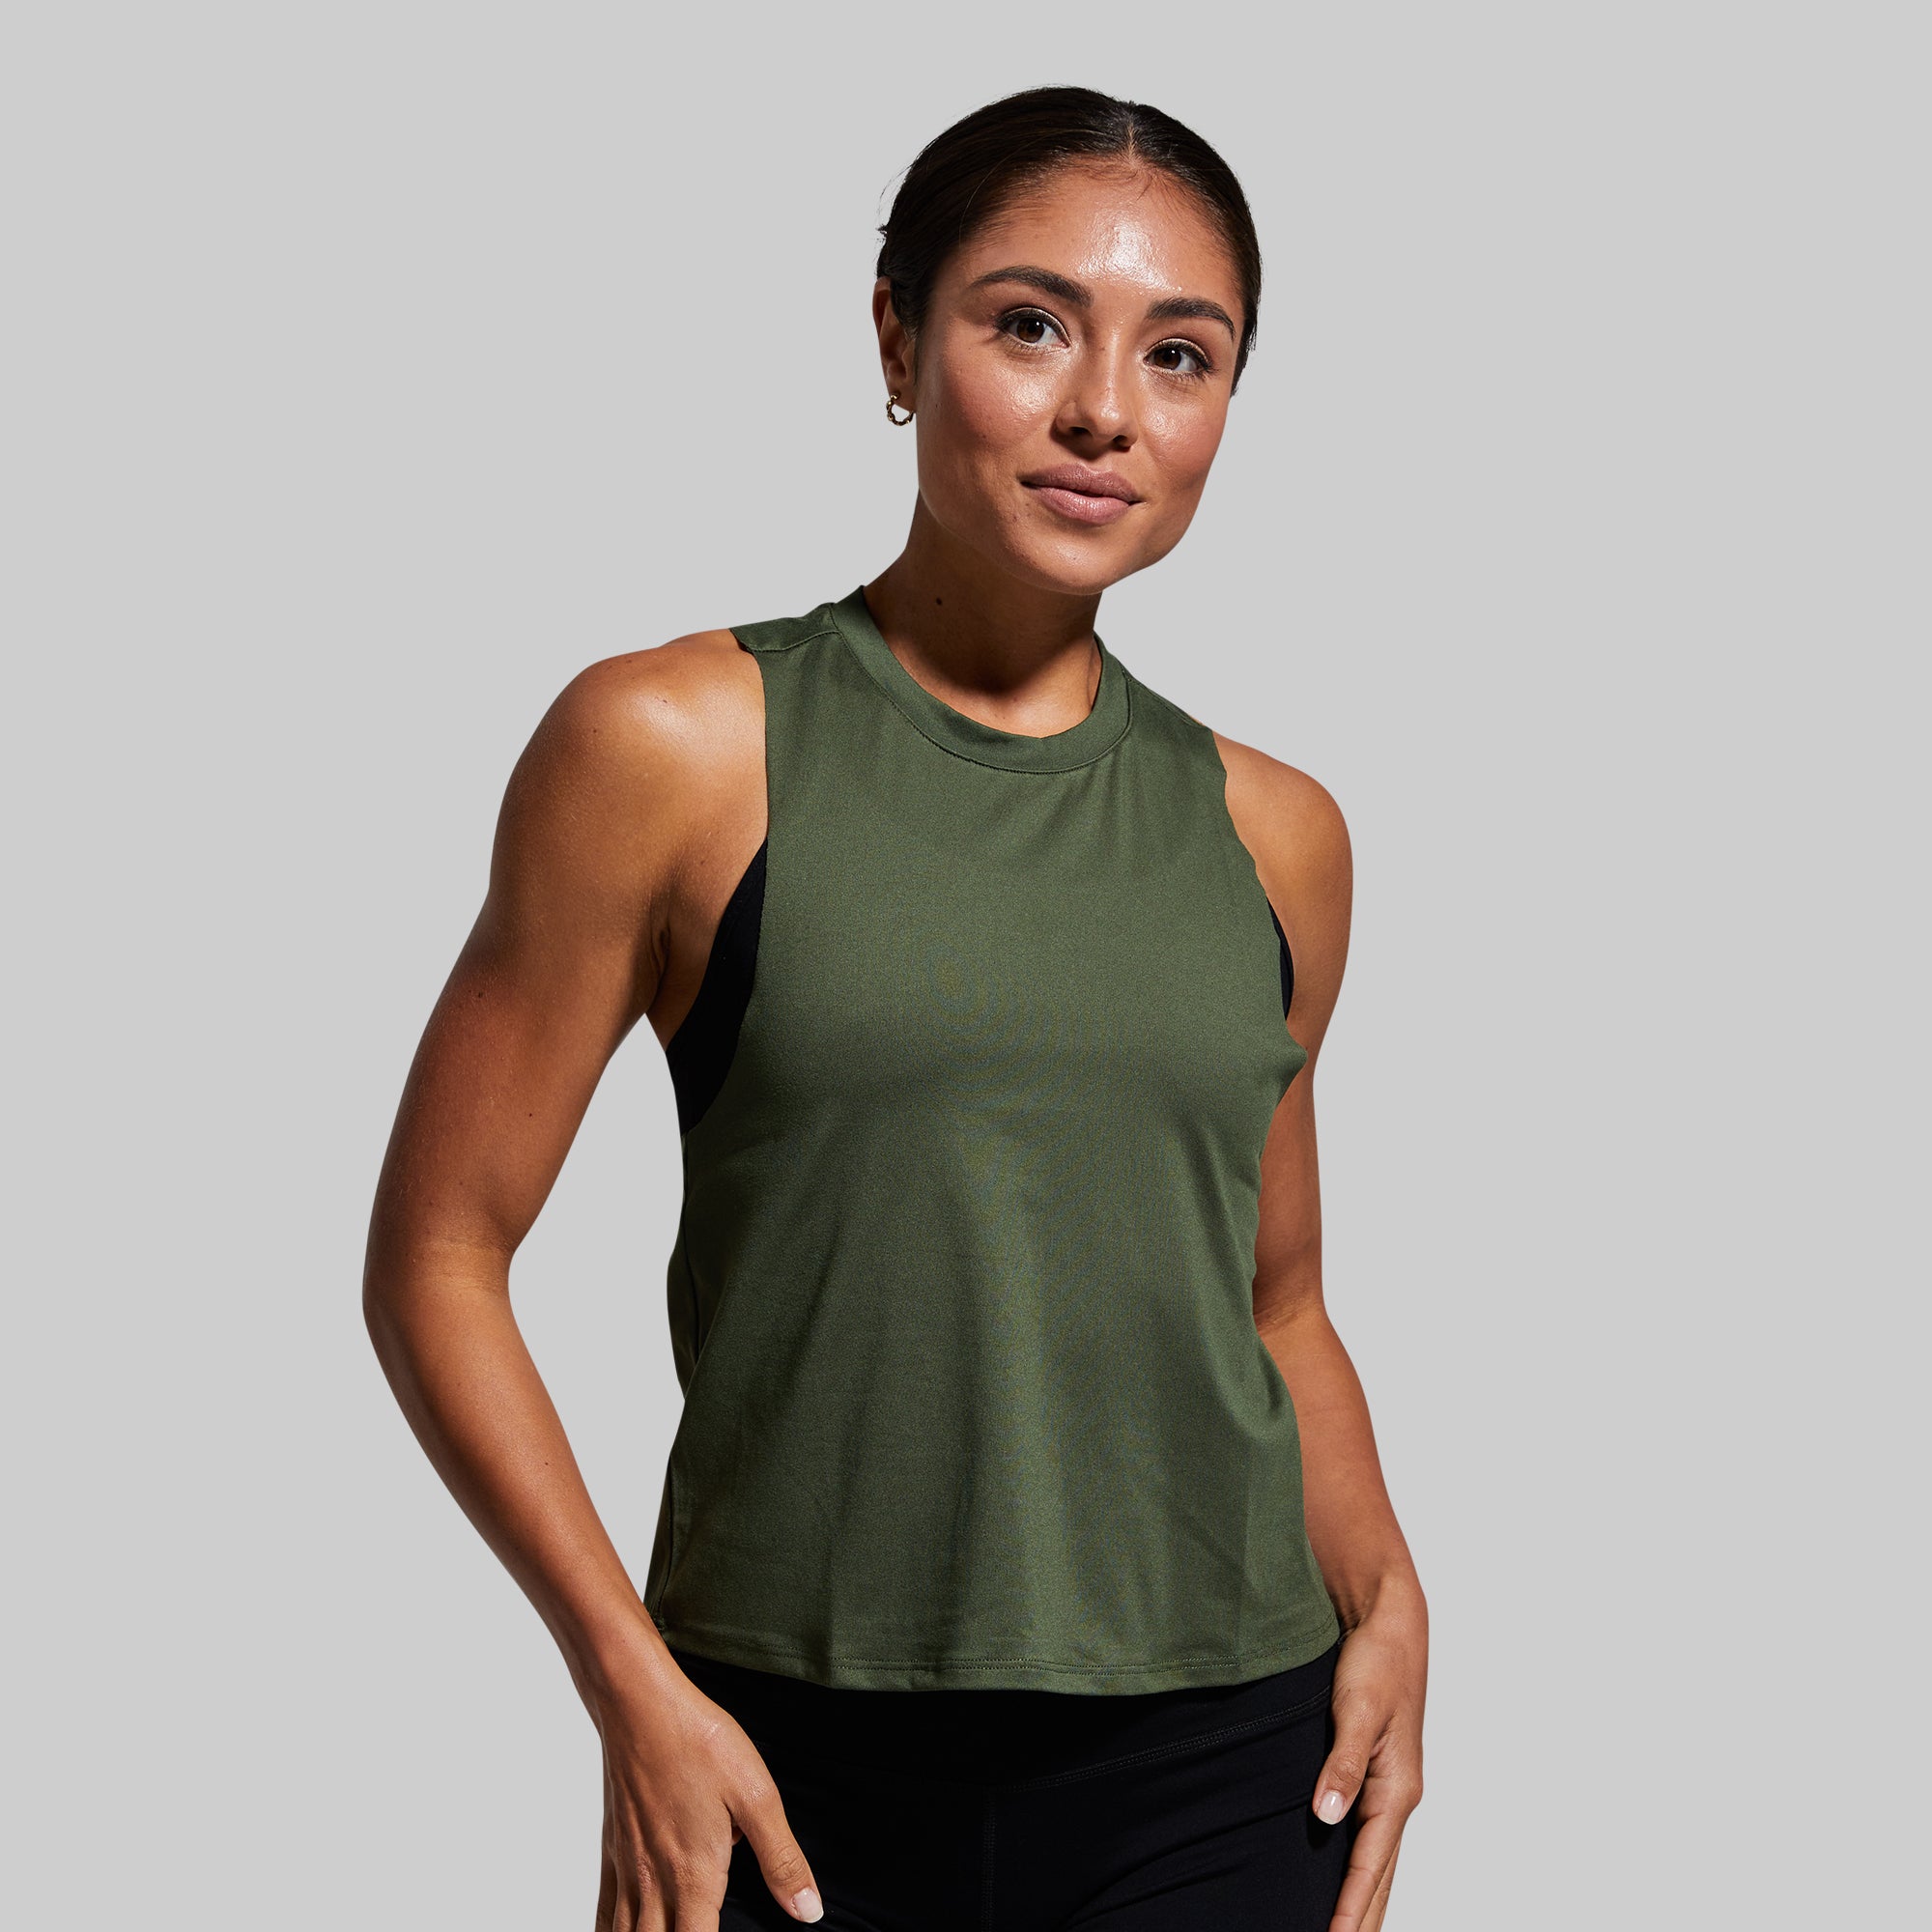 Womens Ribbed High Neck Crop Tank Top M/L Green Racerback Padded